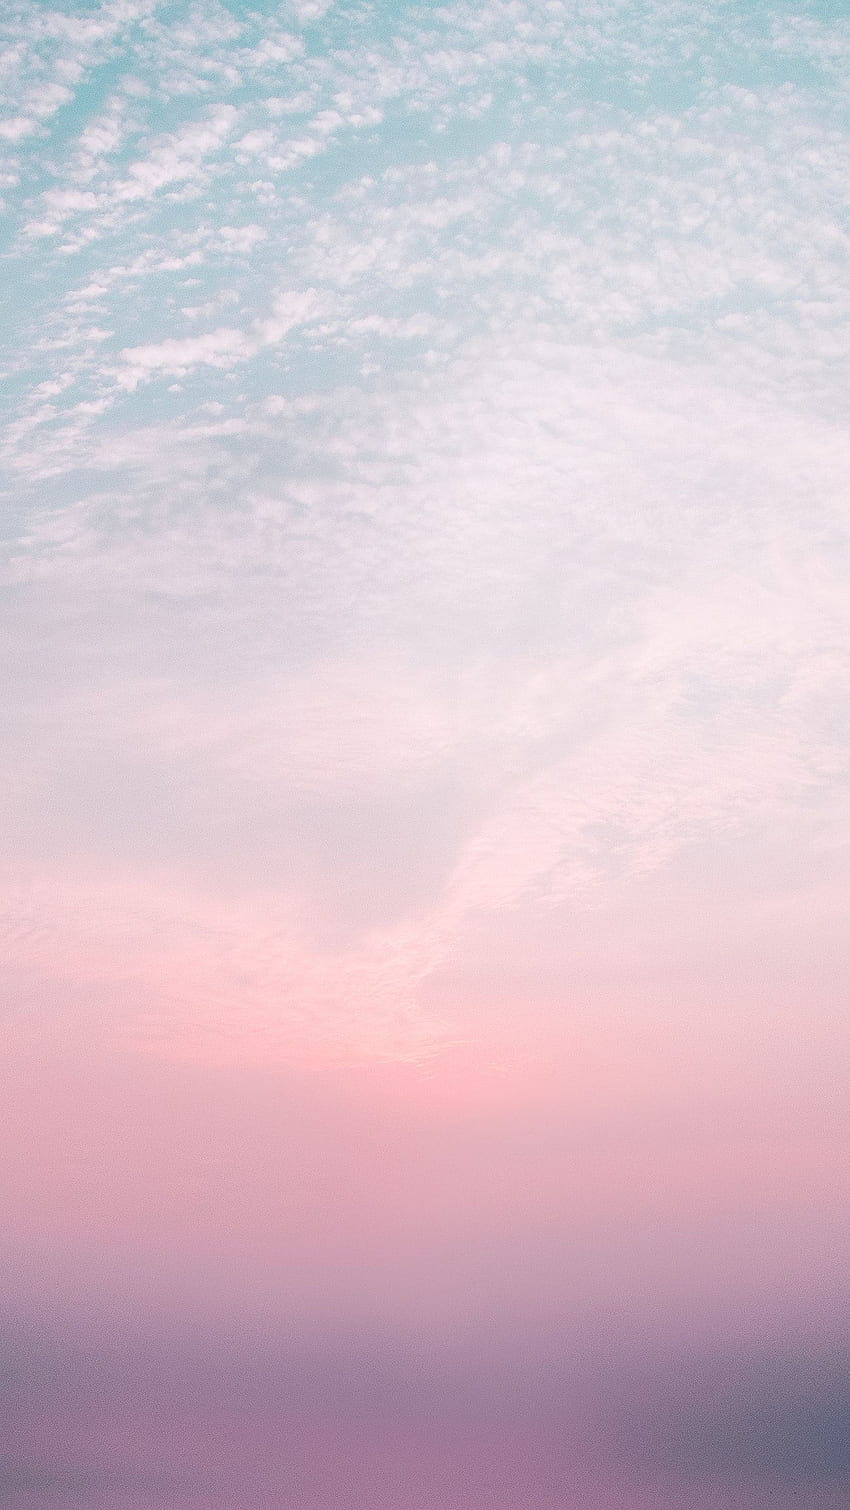 Pink sky mobile phone lock screen. Royalty, Cotton Candy Sky HD phone wallpaper